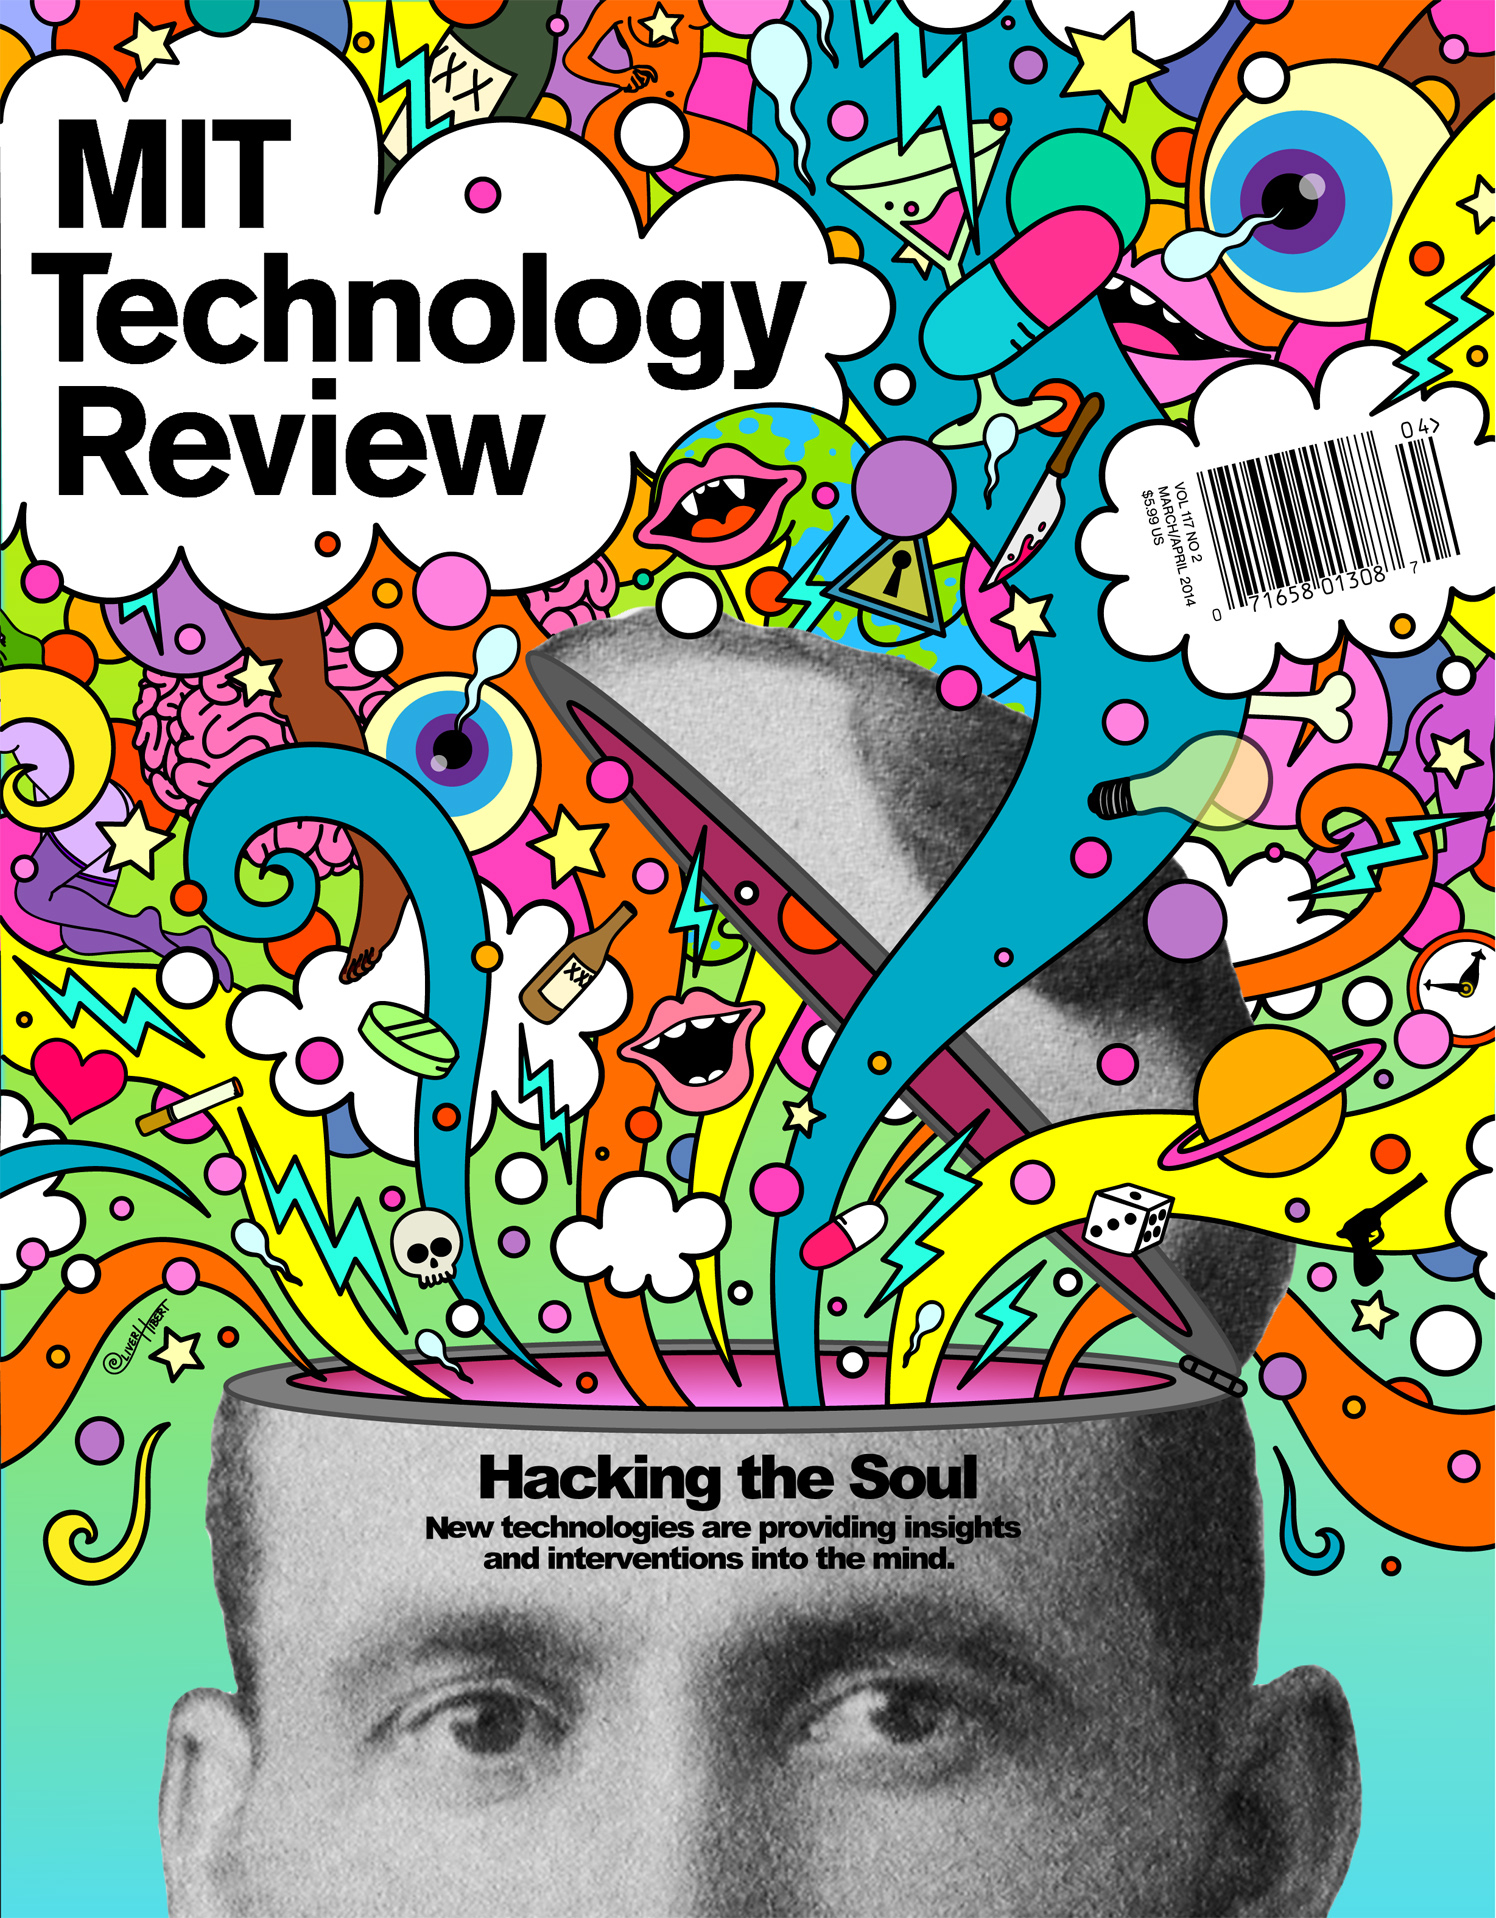 Hacking The Soul / MIT Technology Review